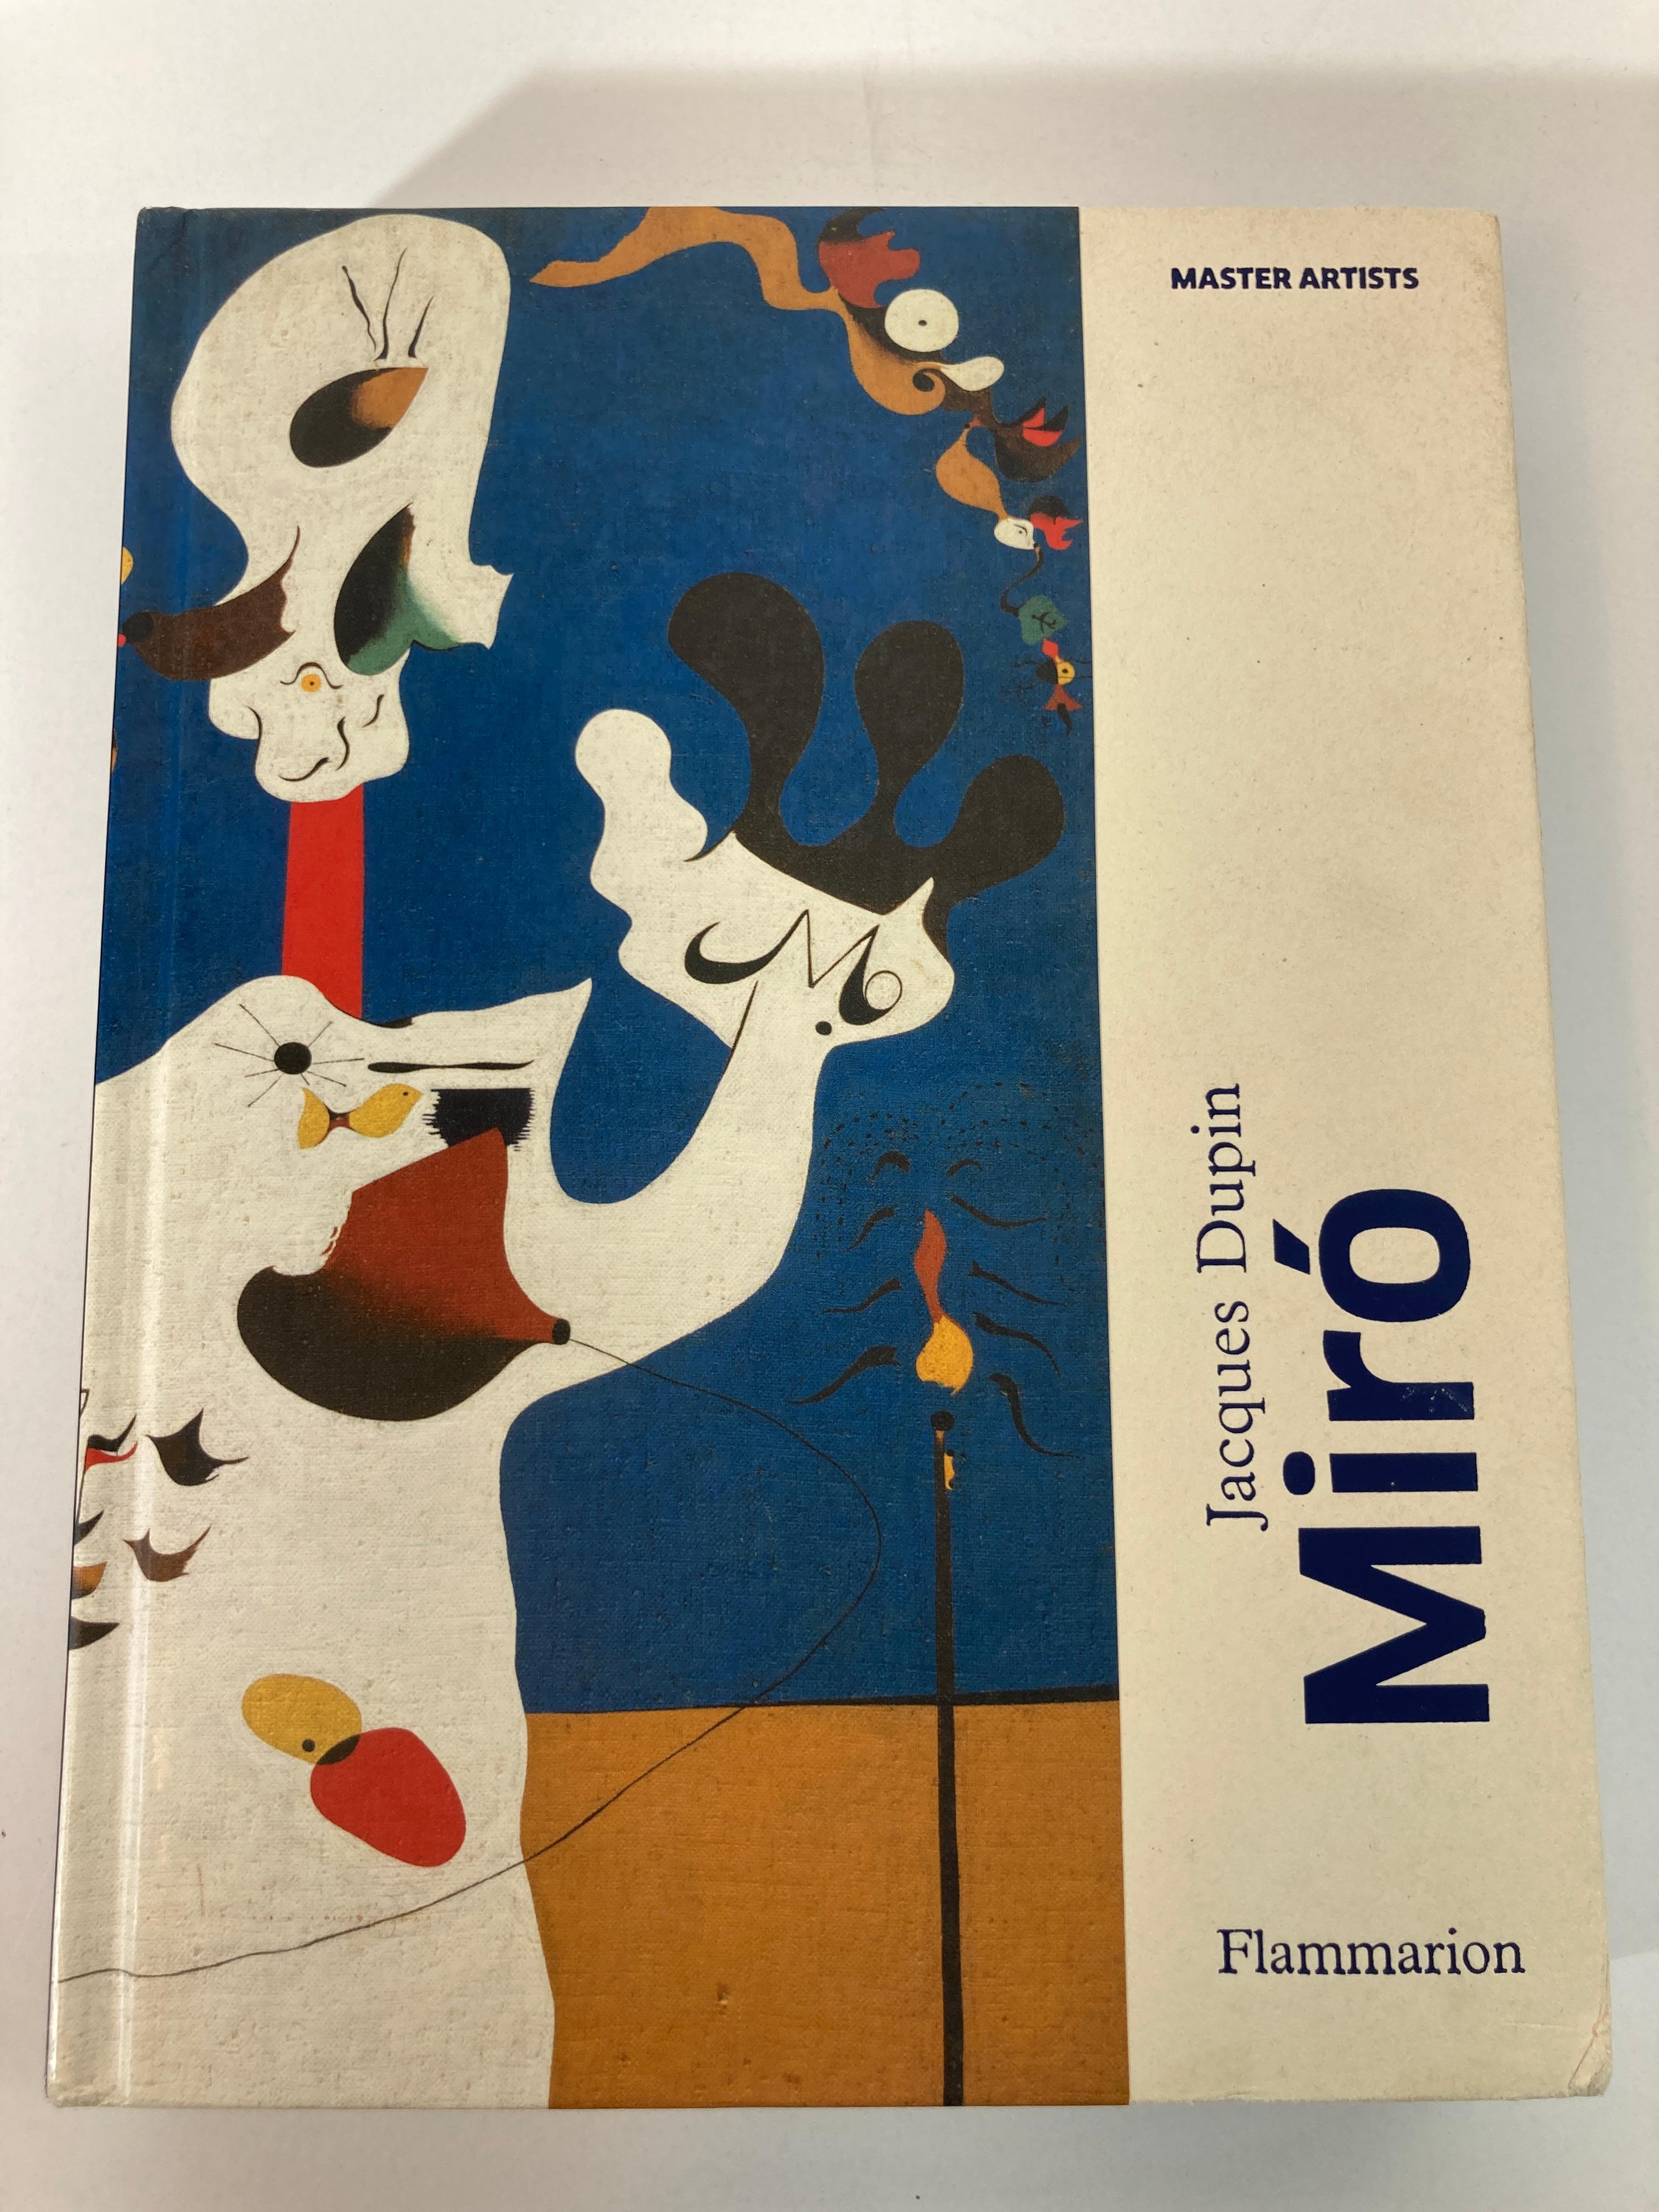 Miro by Jacques Dupin Flammarion, 2012 Hardcover.
Synopsis: Jacques Dupin, esteemed French poet and Miró’s friend and collaborator since 1956, is the ultimate authority on the artist. He has organized numerous exhibitions devoted to the artist, and